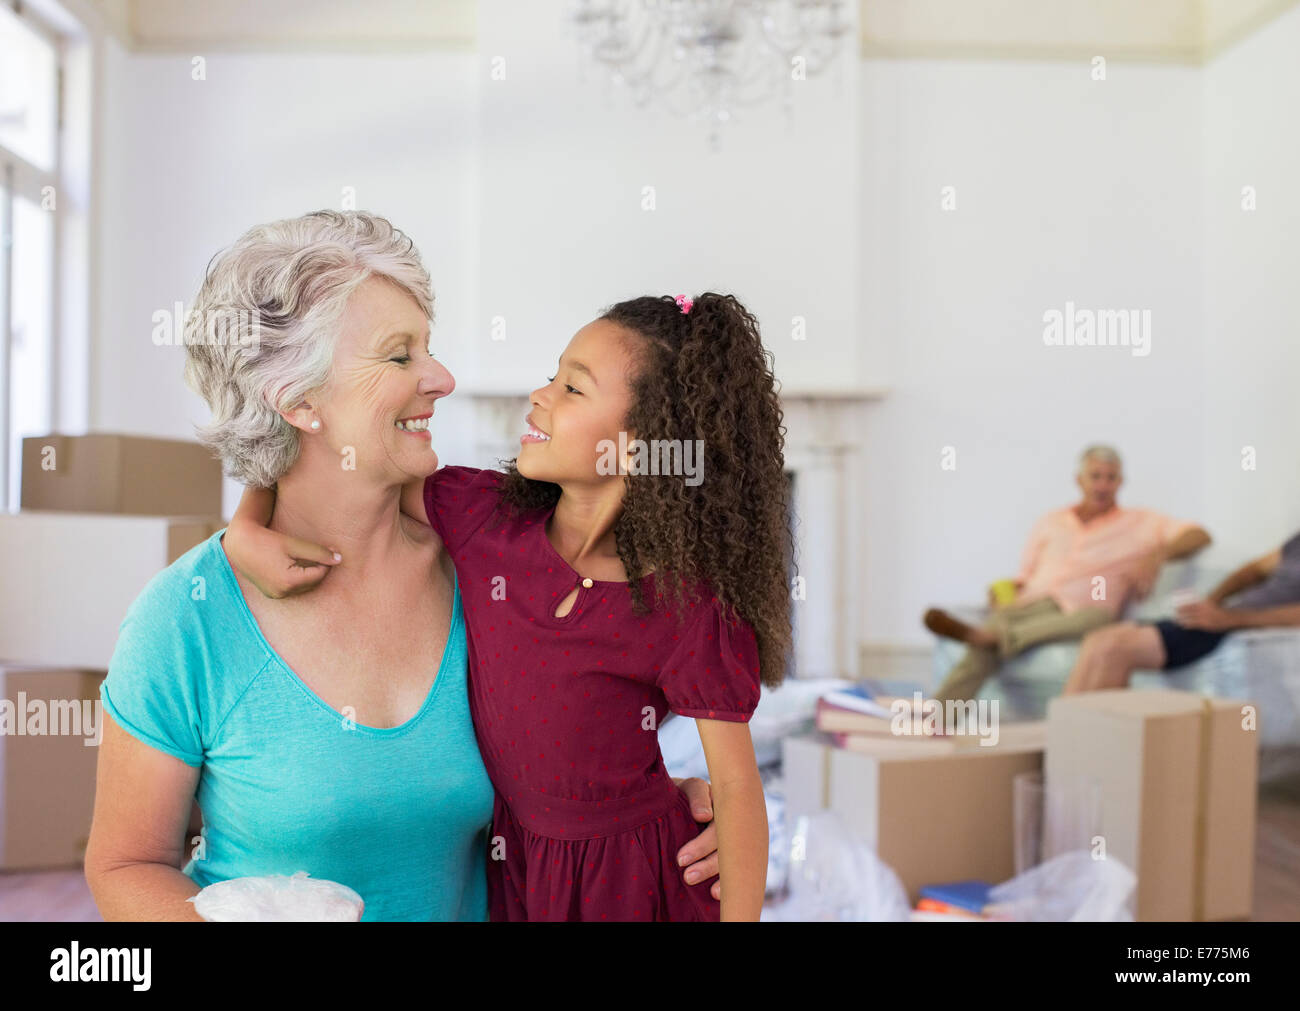 Grandmother and granddaughter hugging in living space Stock Photo